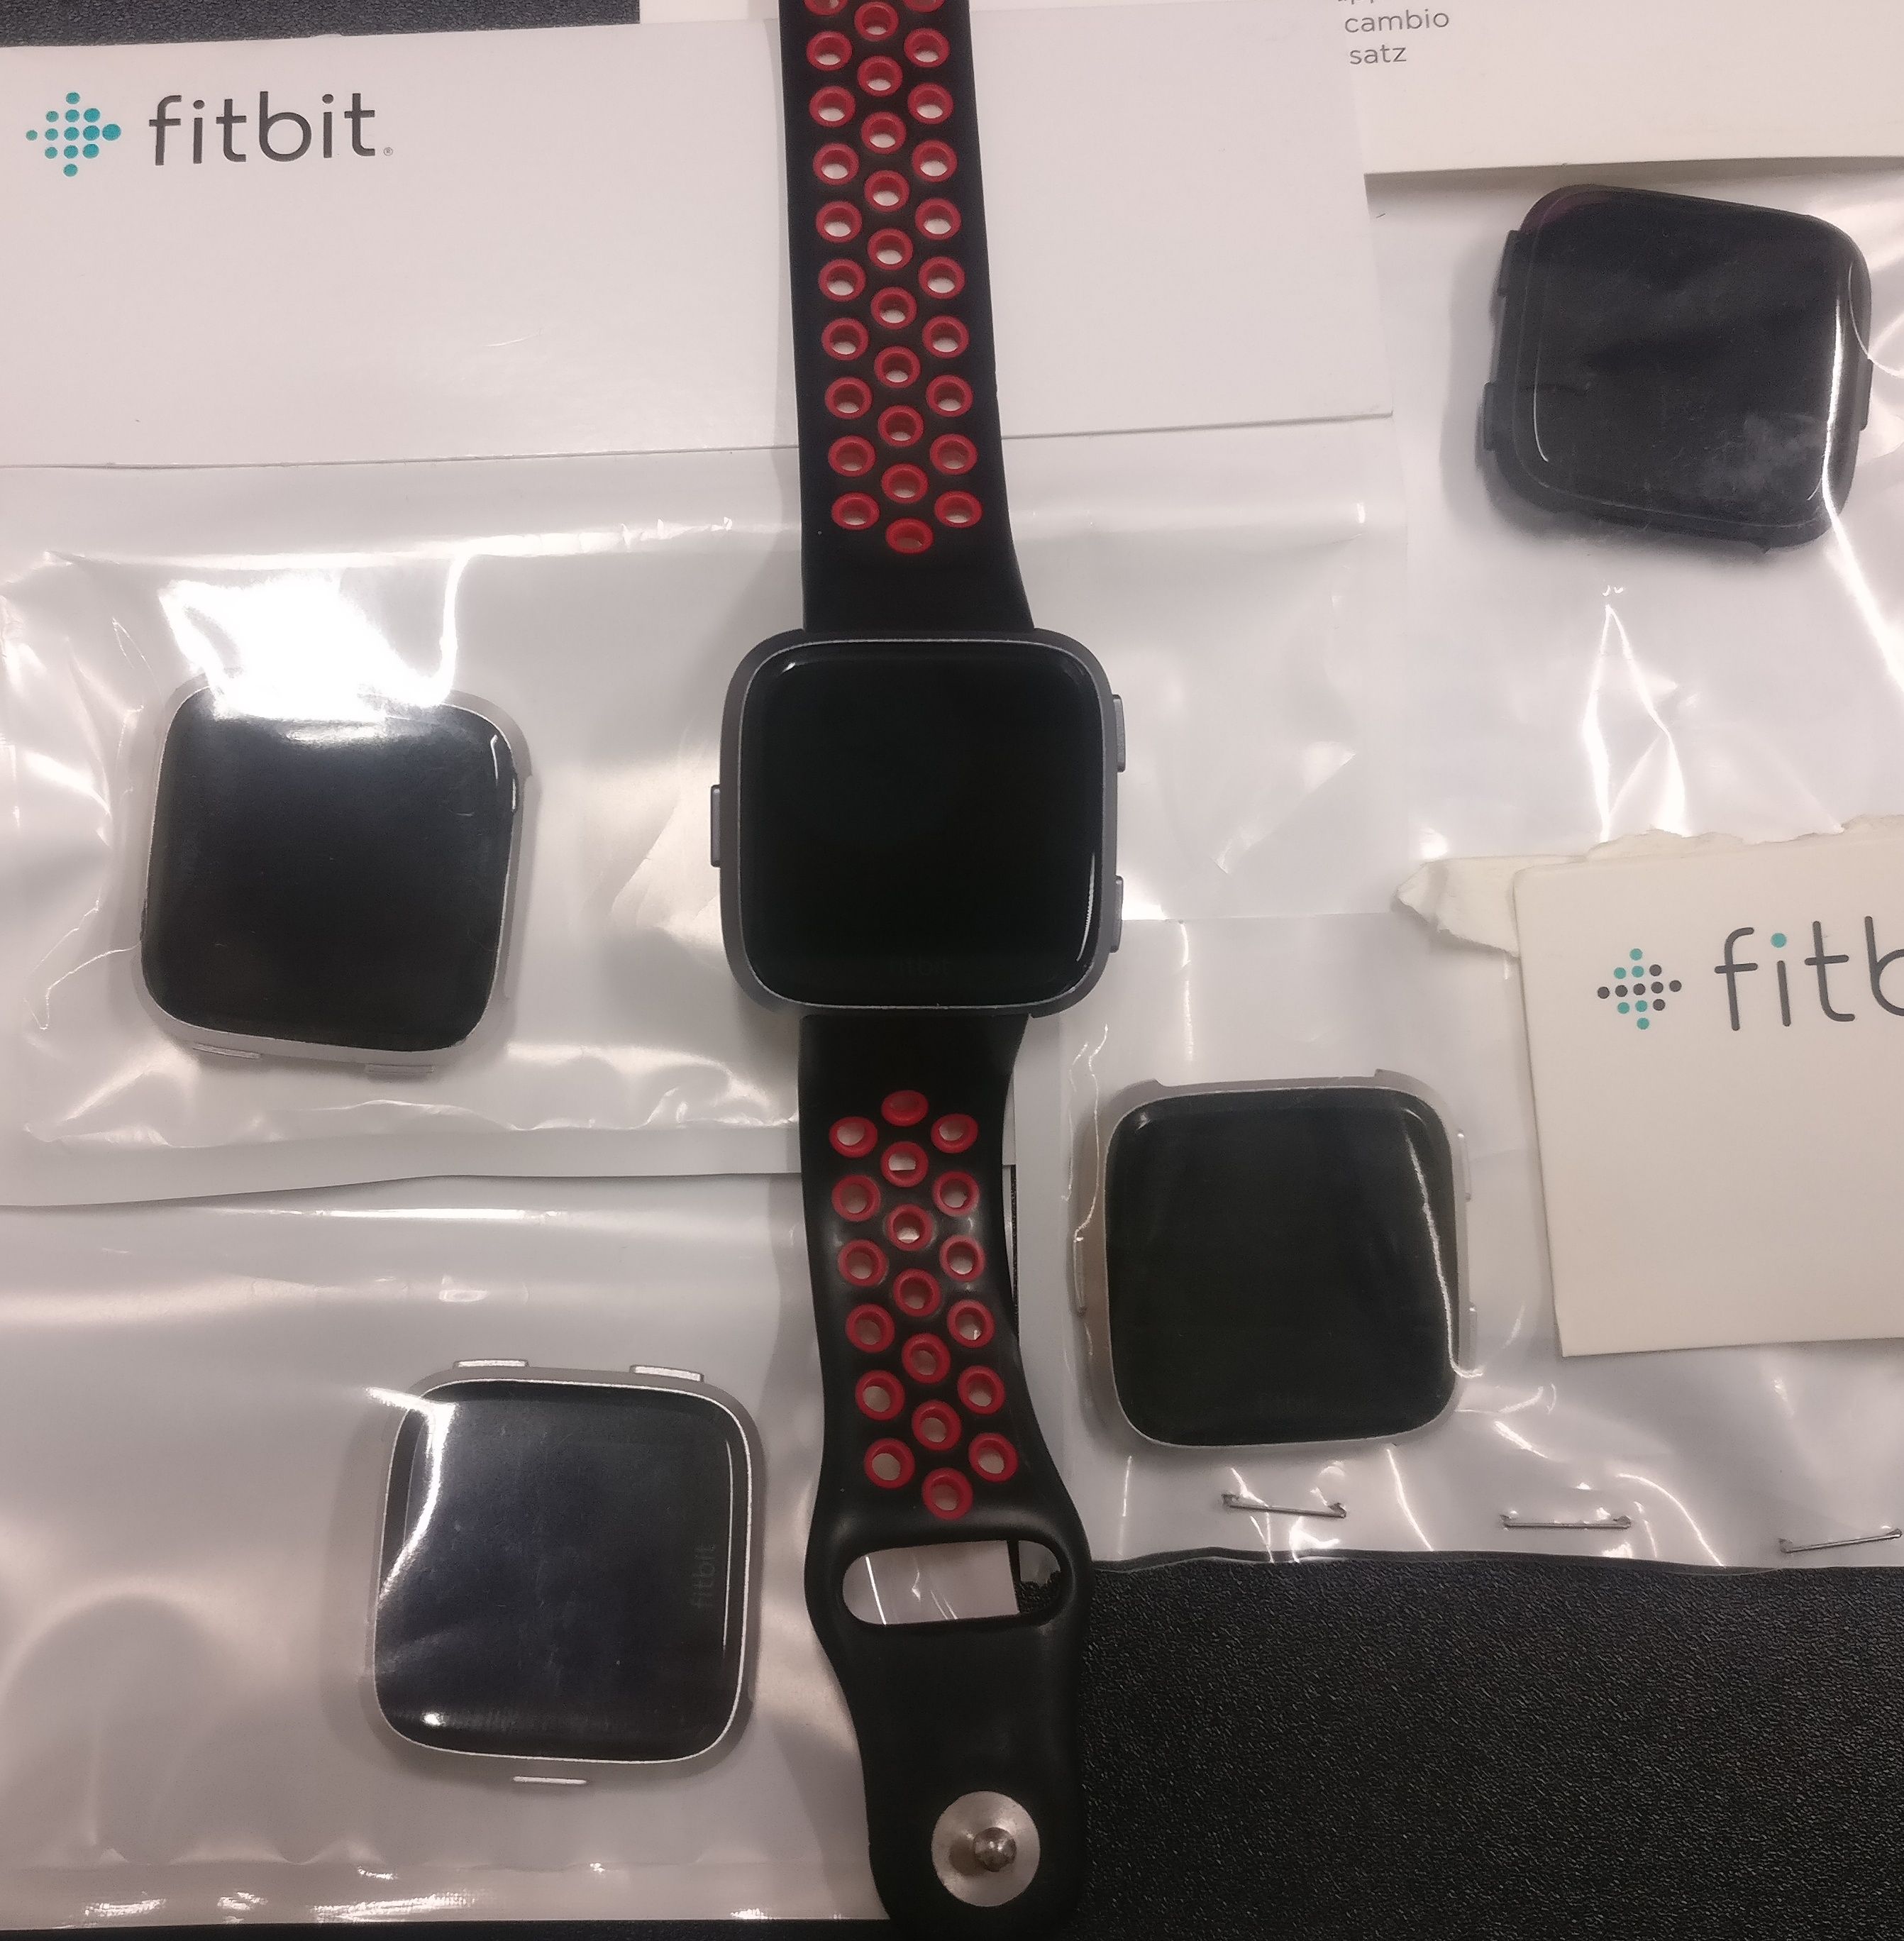 can i wear my fitbit versa 2 in the pool